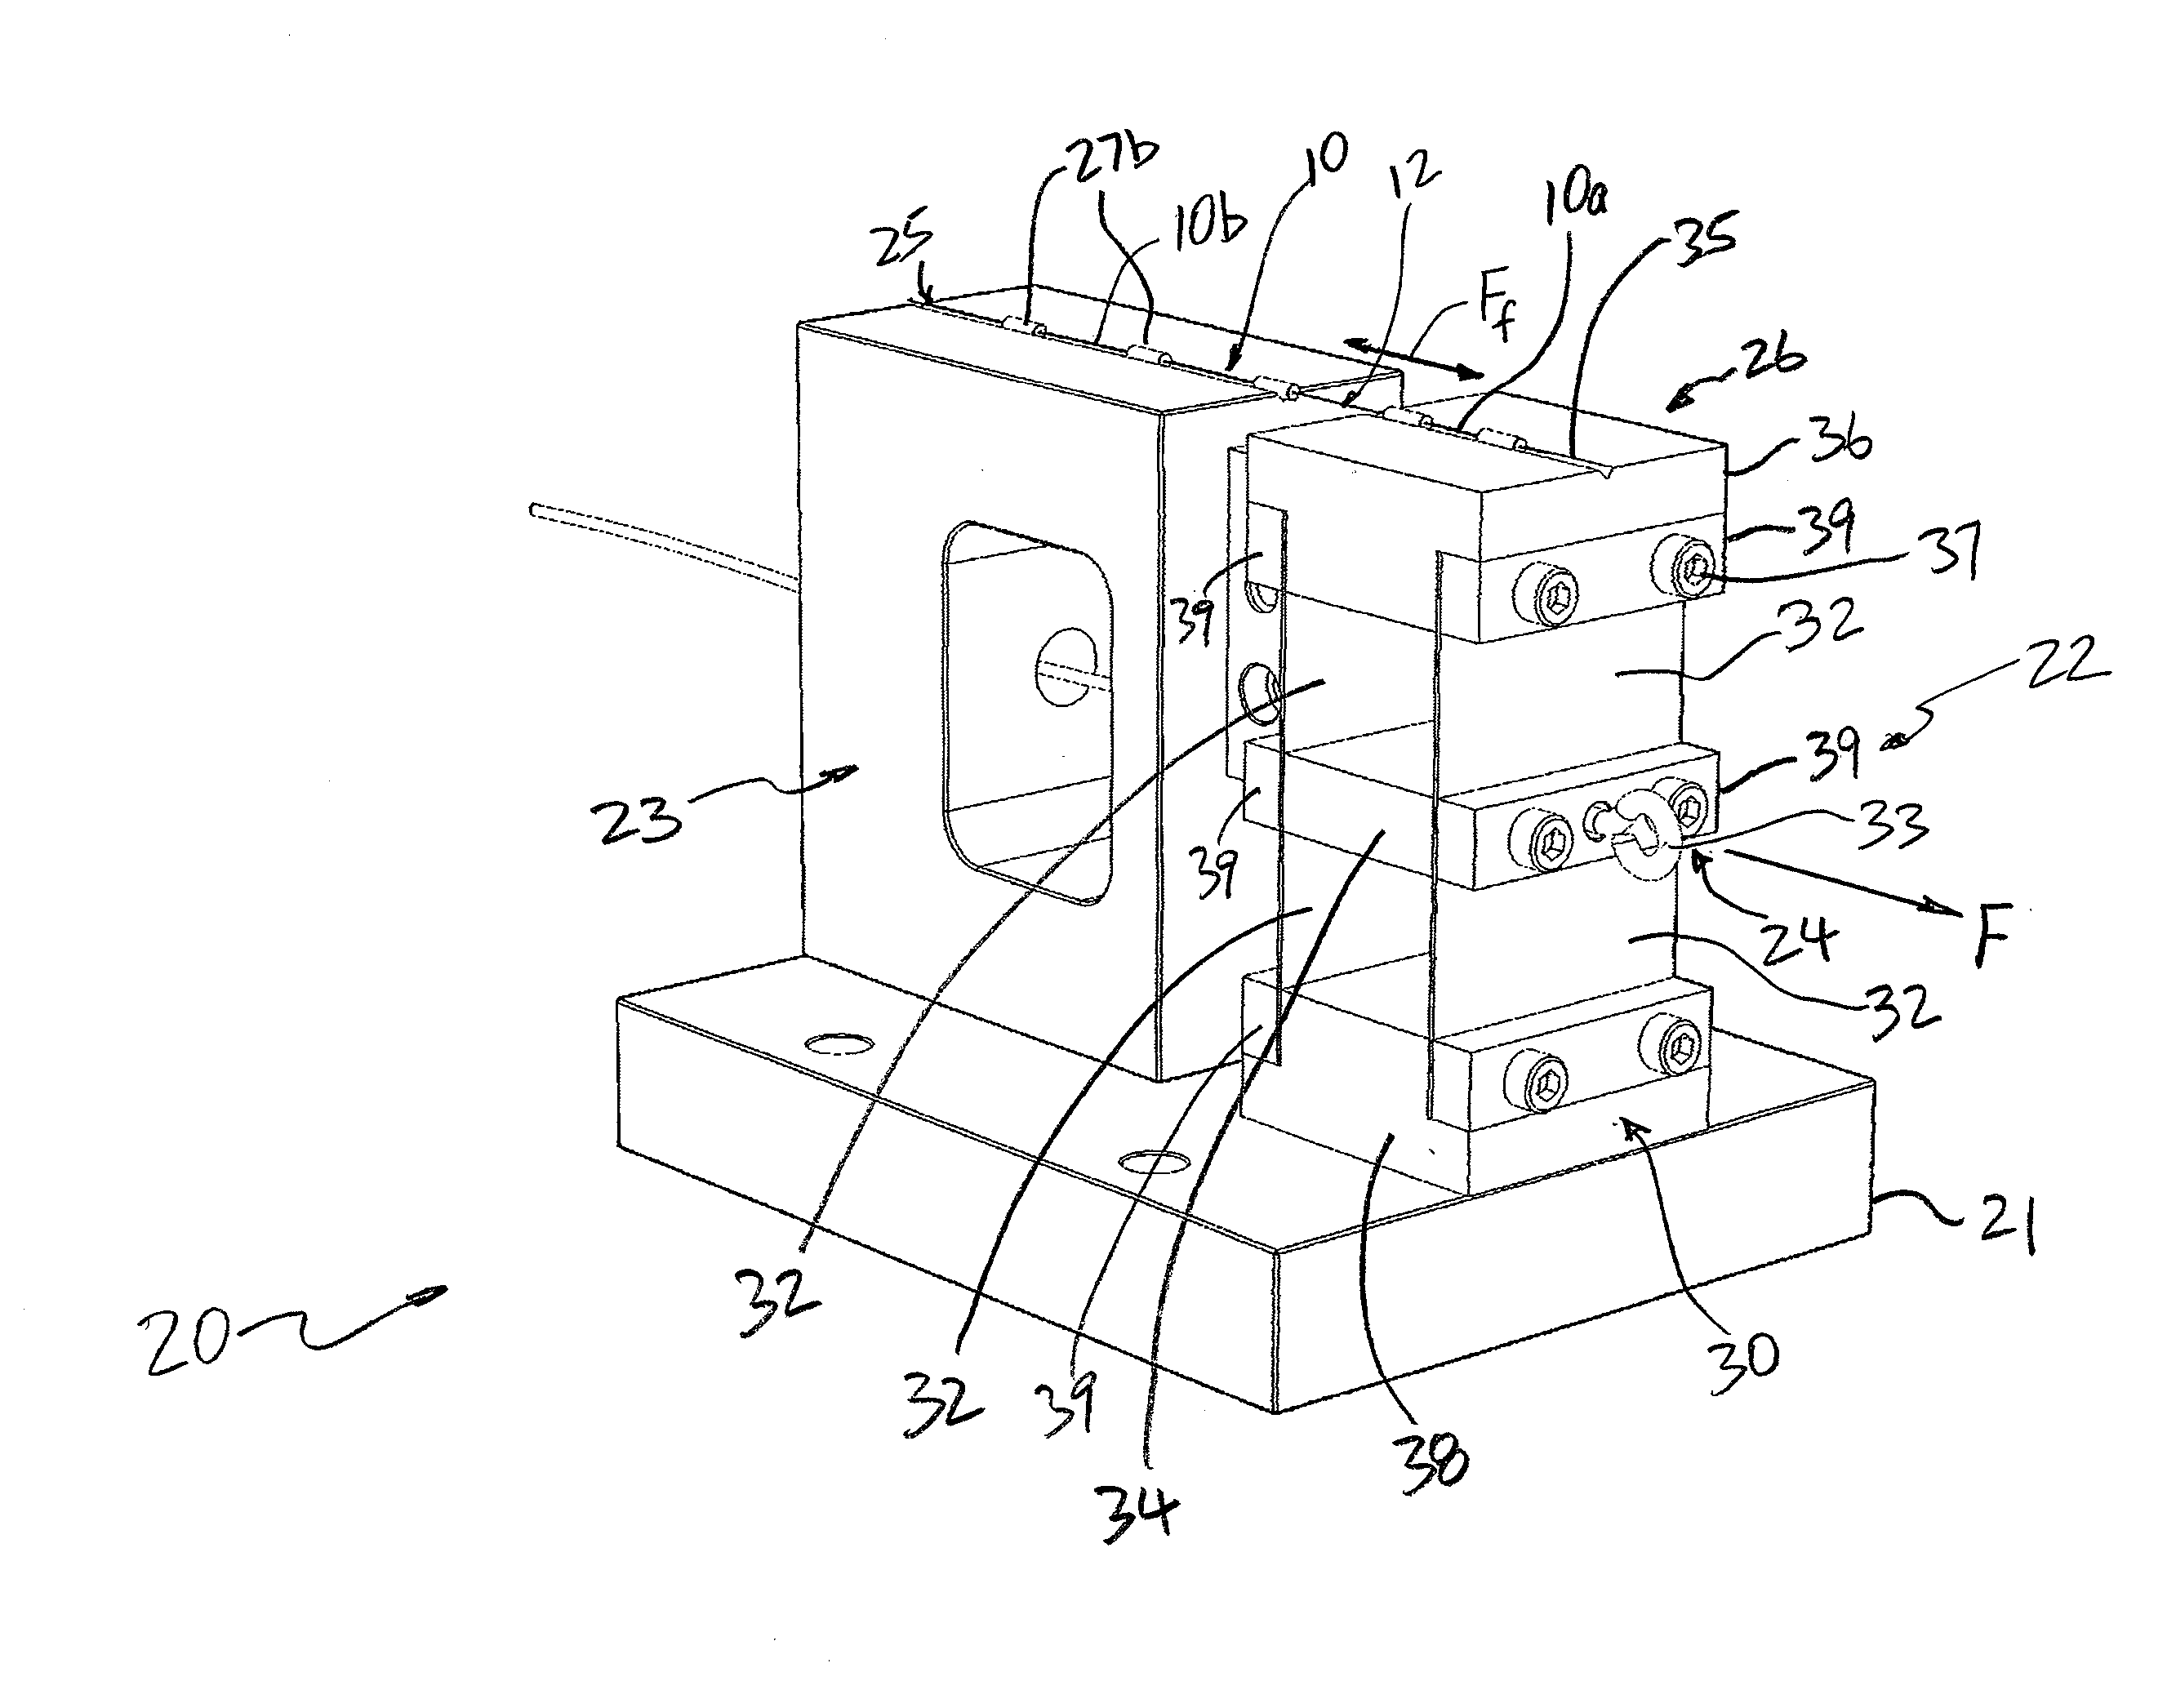 Tensioning device having a flexure mechanism for applying axial tension to cleave an optical fiber